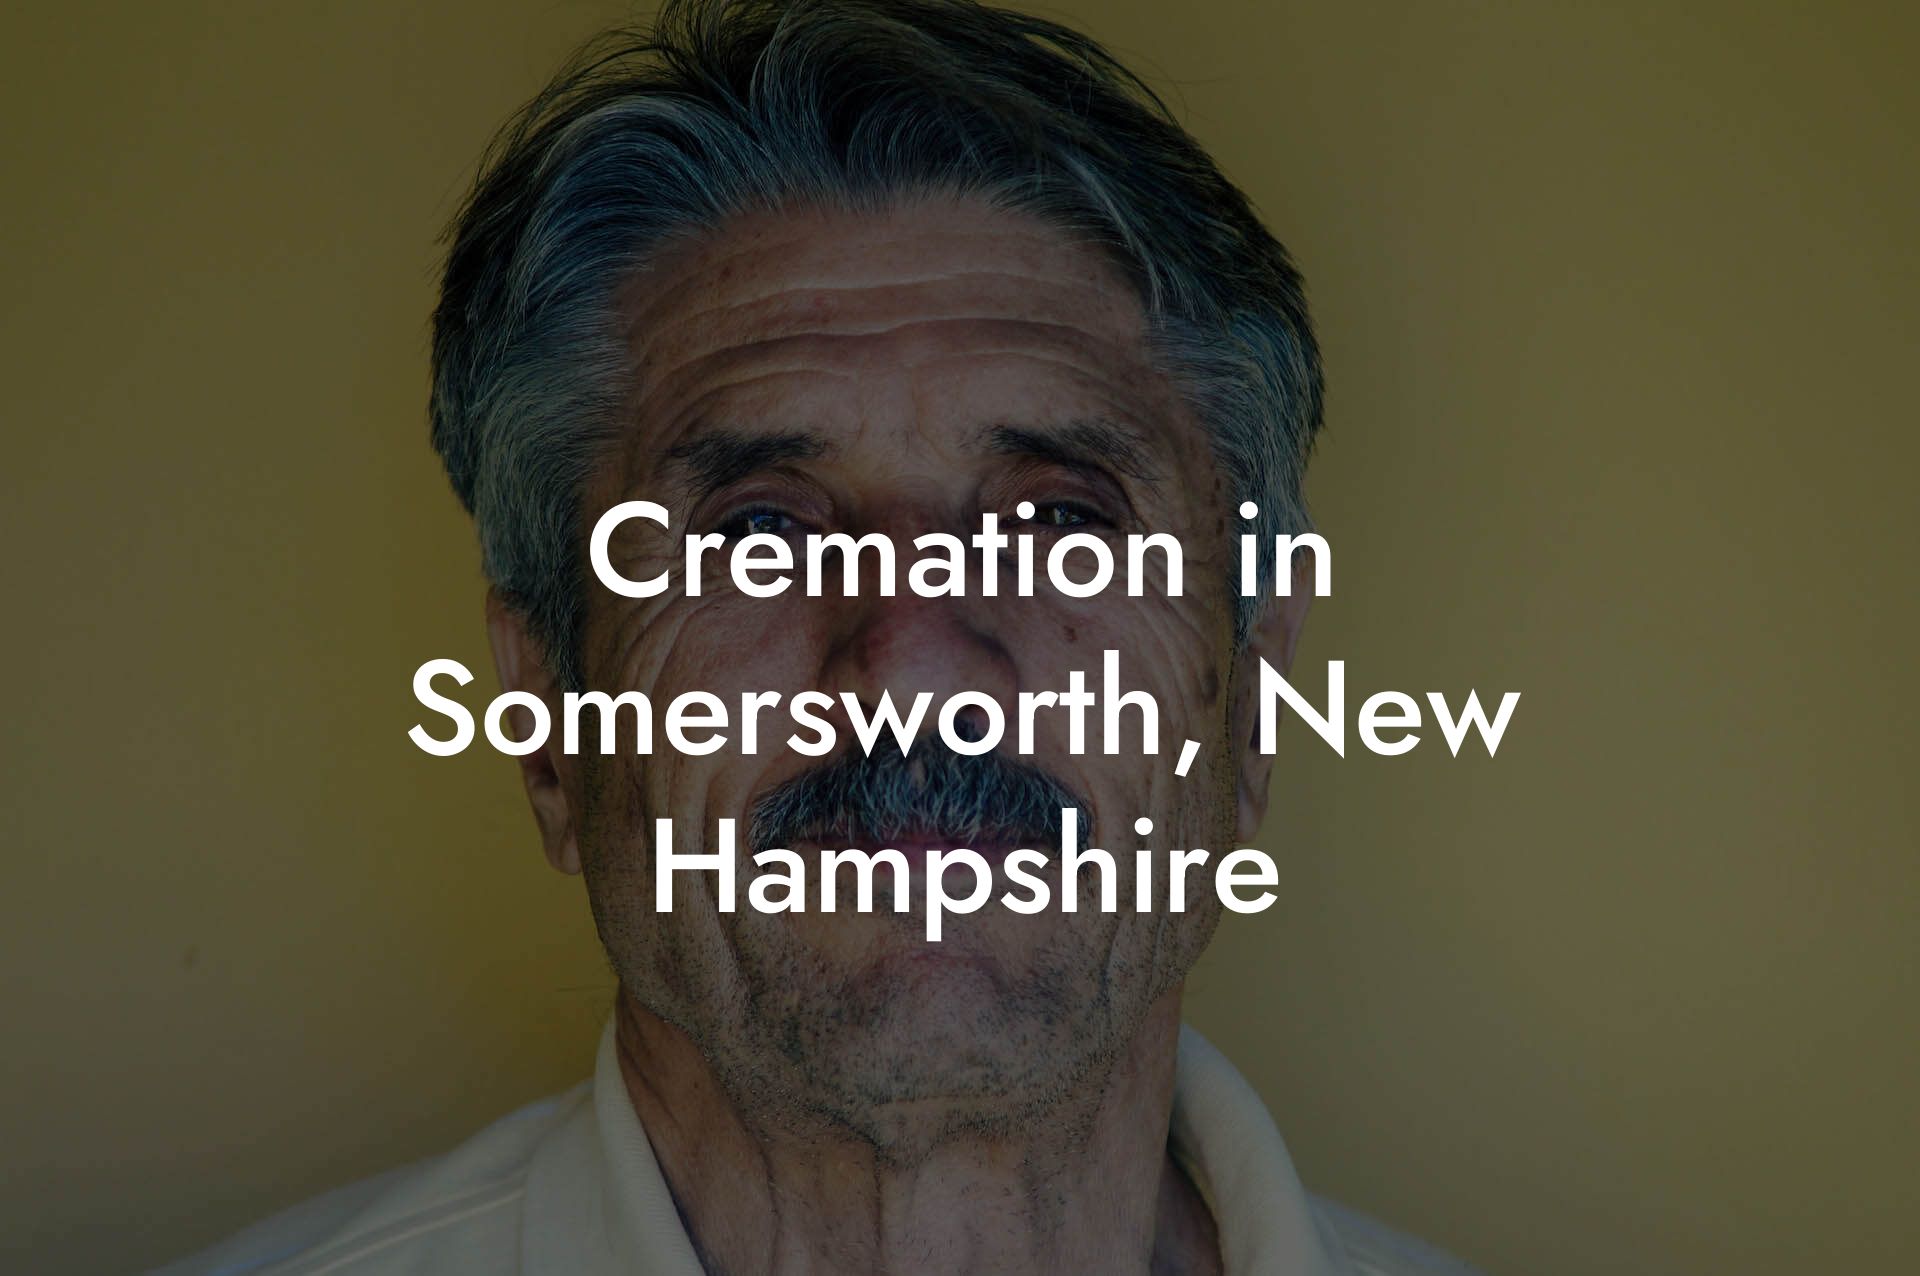 Cremation in Somersworth, New Hampshire